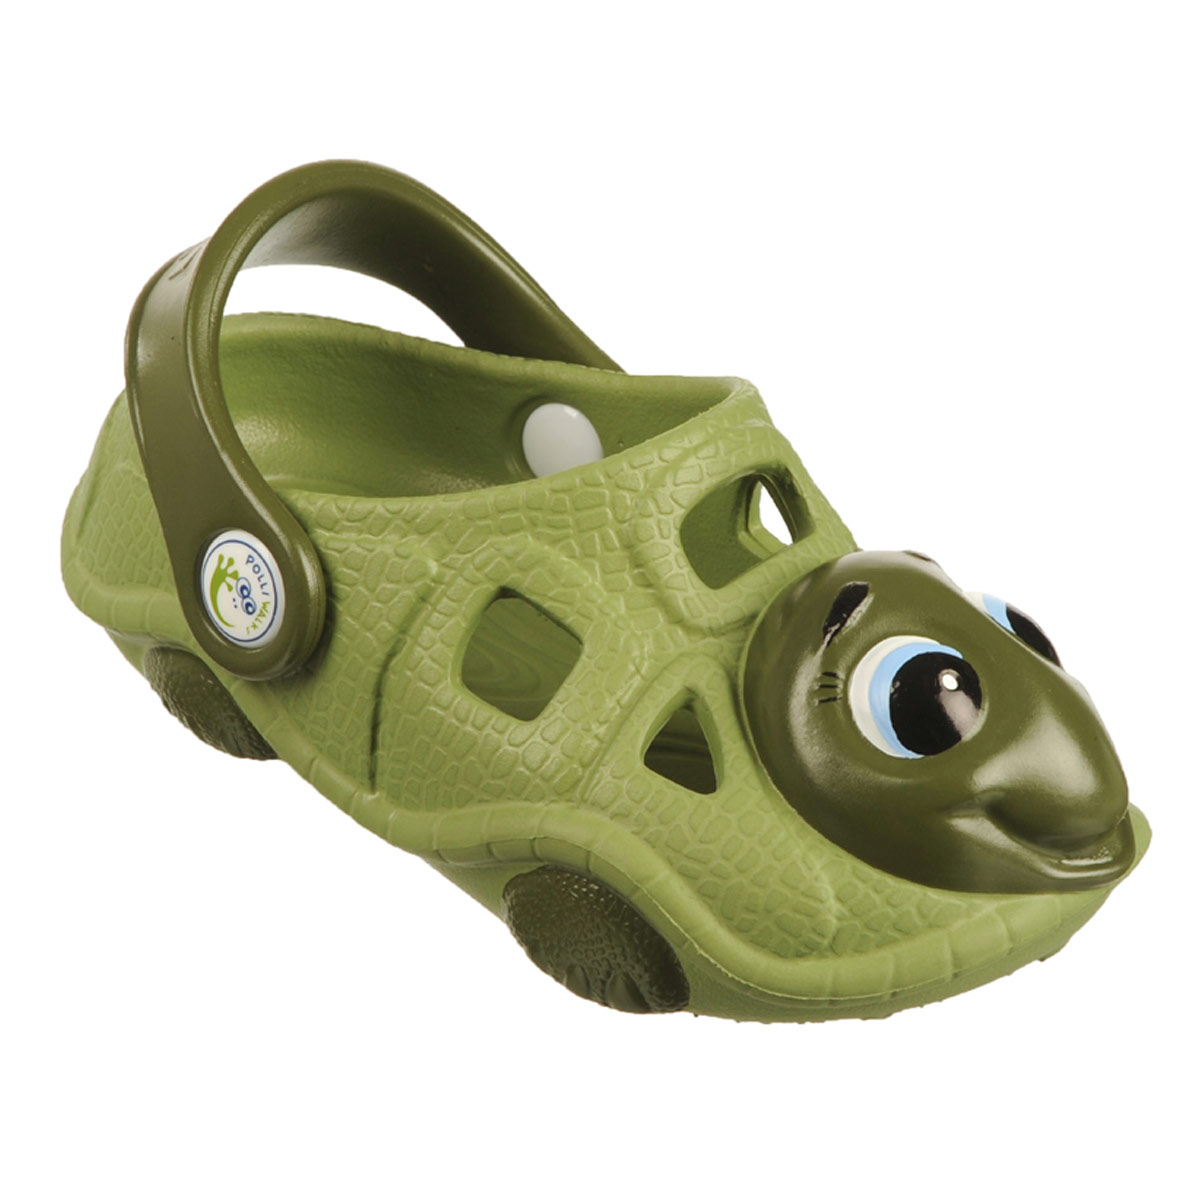 Polliwalks : Toddler shoes Timmy the Turtle Green # 7